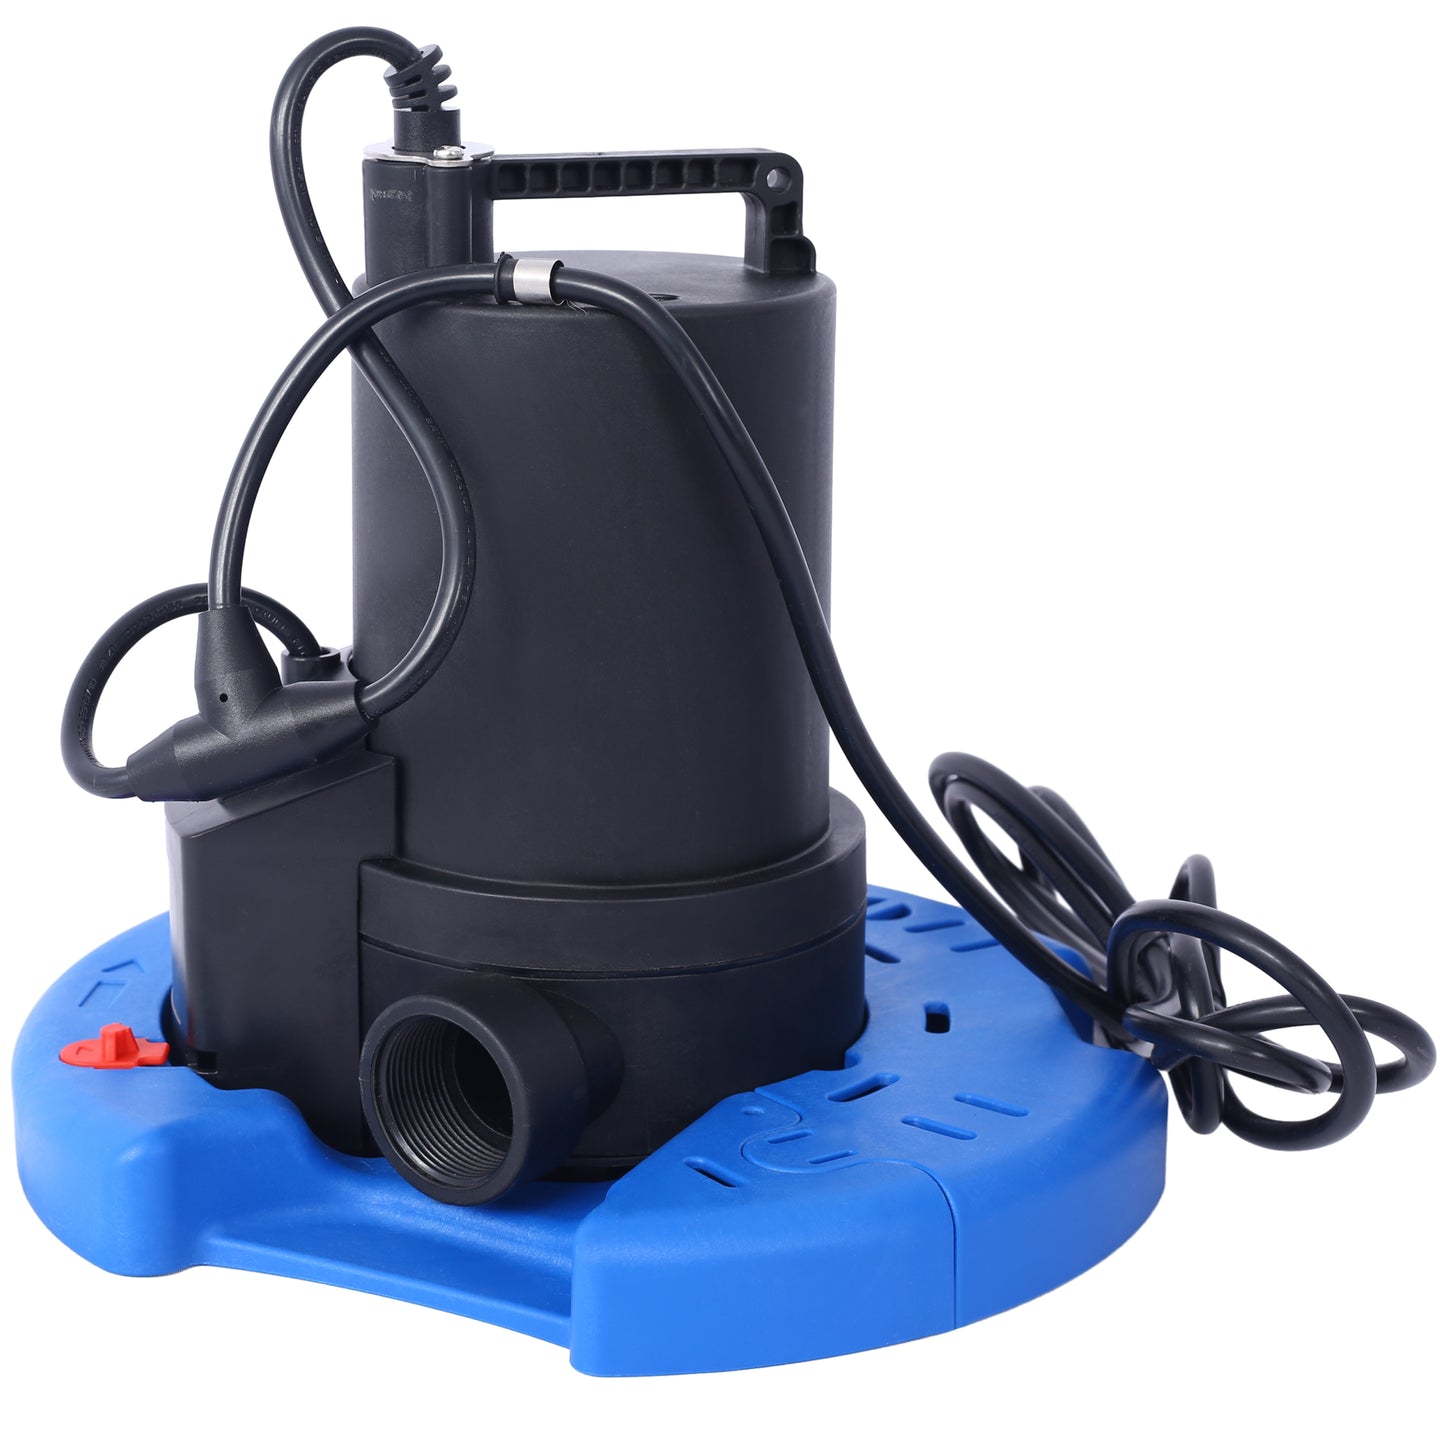 1/4 HP Automatic Swimming Pool Cover Pump 120 V Submersible with 3/4 Check Valve Adapter1850 GPH Water Removal for Pool, Hot Tubs, Rooftops, Water Beds and more